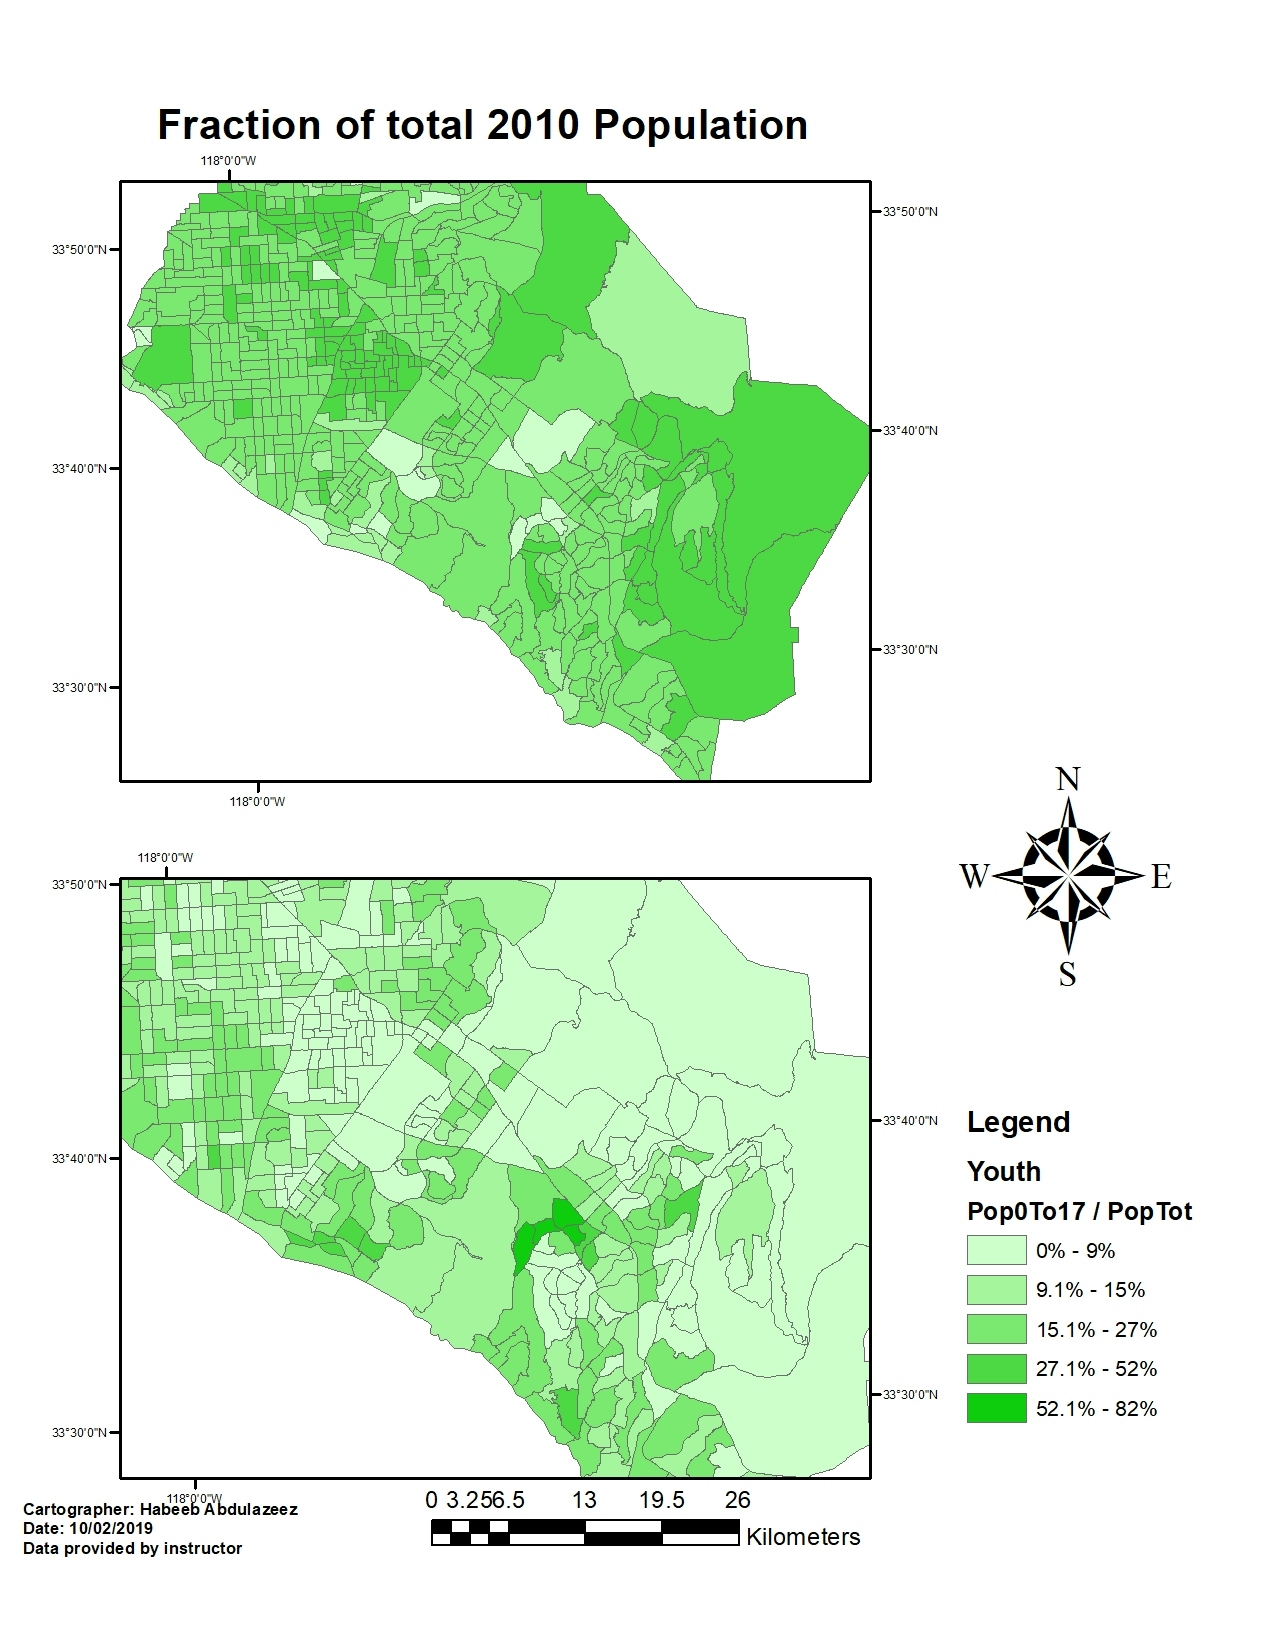 Comparing 2010 elderly and youth population compositions in Orange County, California